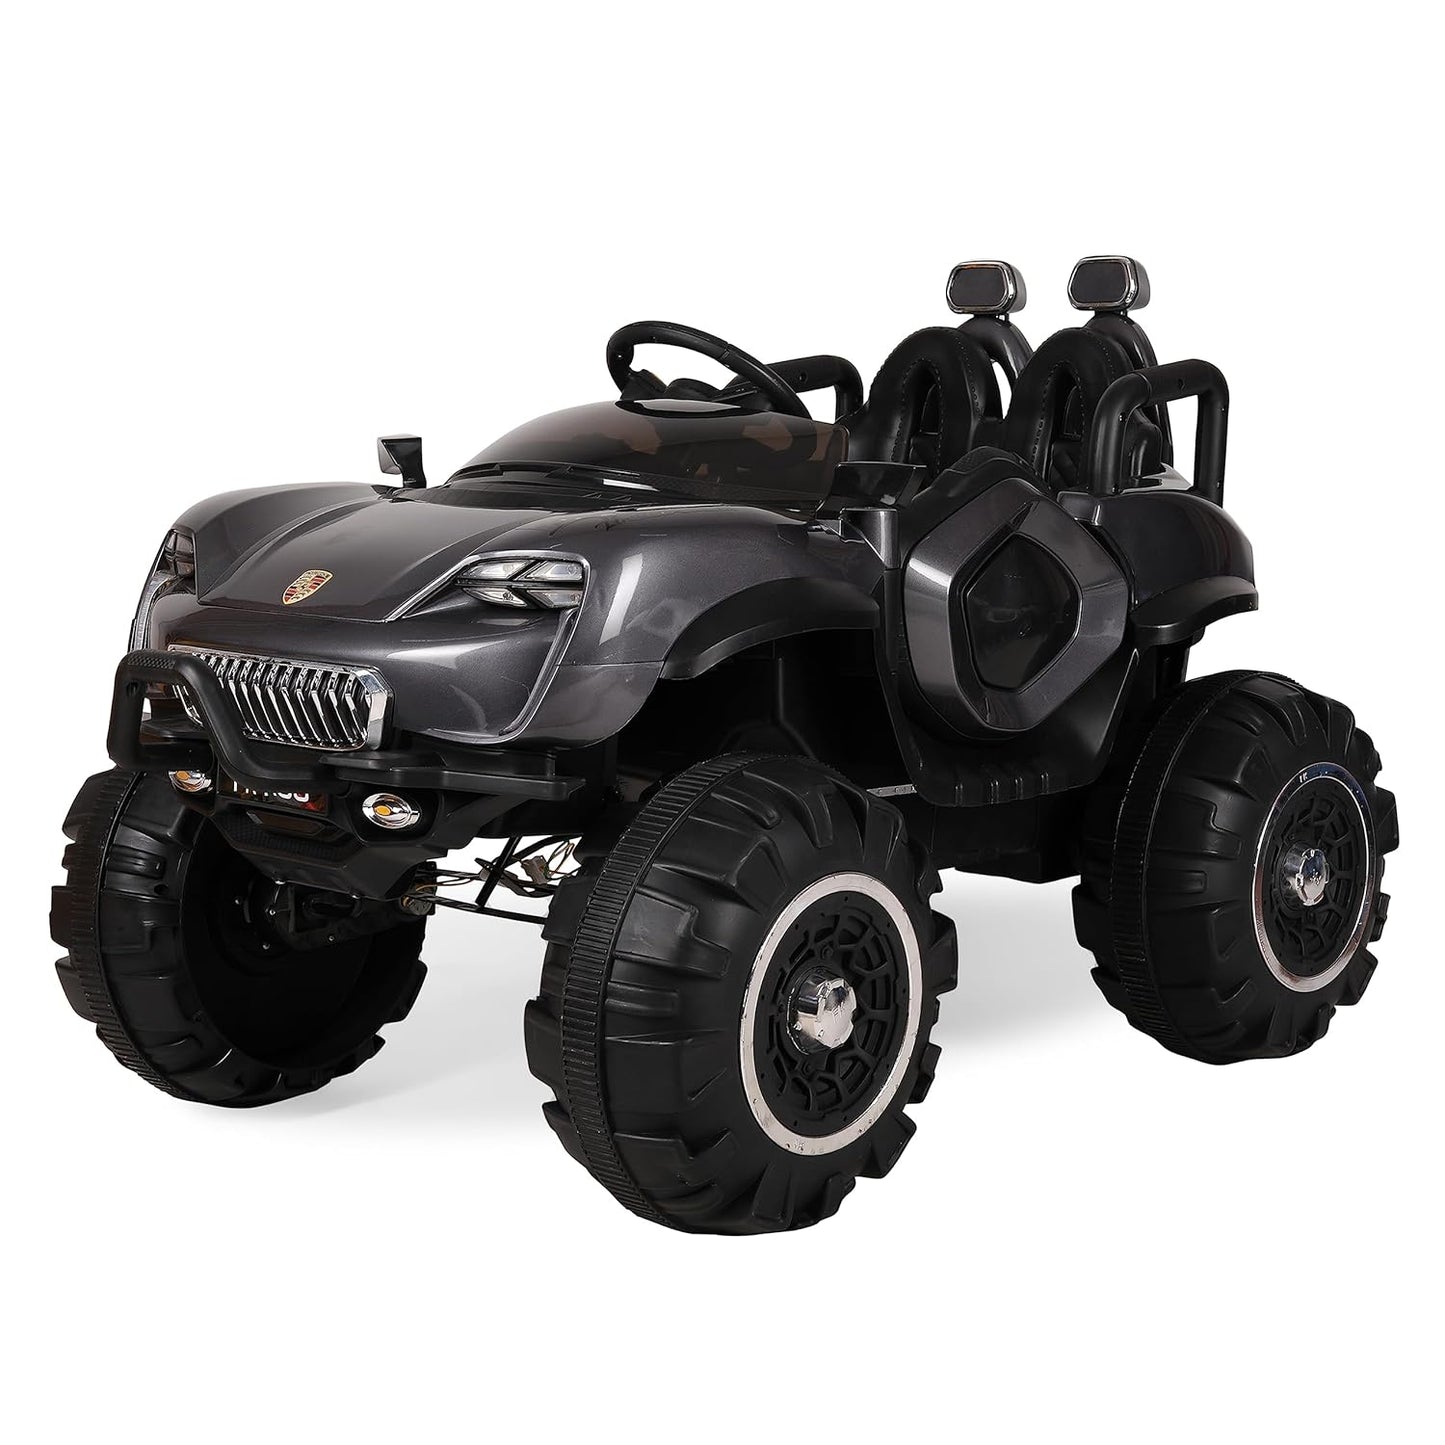 GettBoles 4X4 Electric Rechargeable Jeep for Kids of Age 2 to 7 Years- Battery Operated Car Jeep with Mic, M3 Player, Led Lights, Suspension and Bluetooth Remote (Grey)